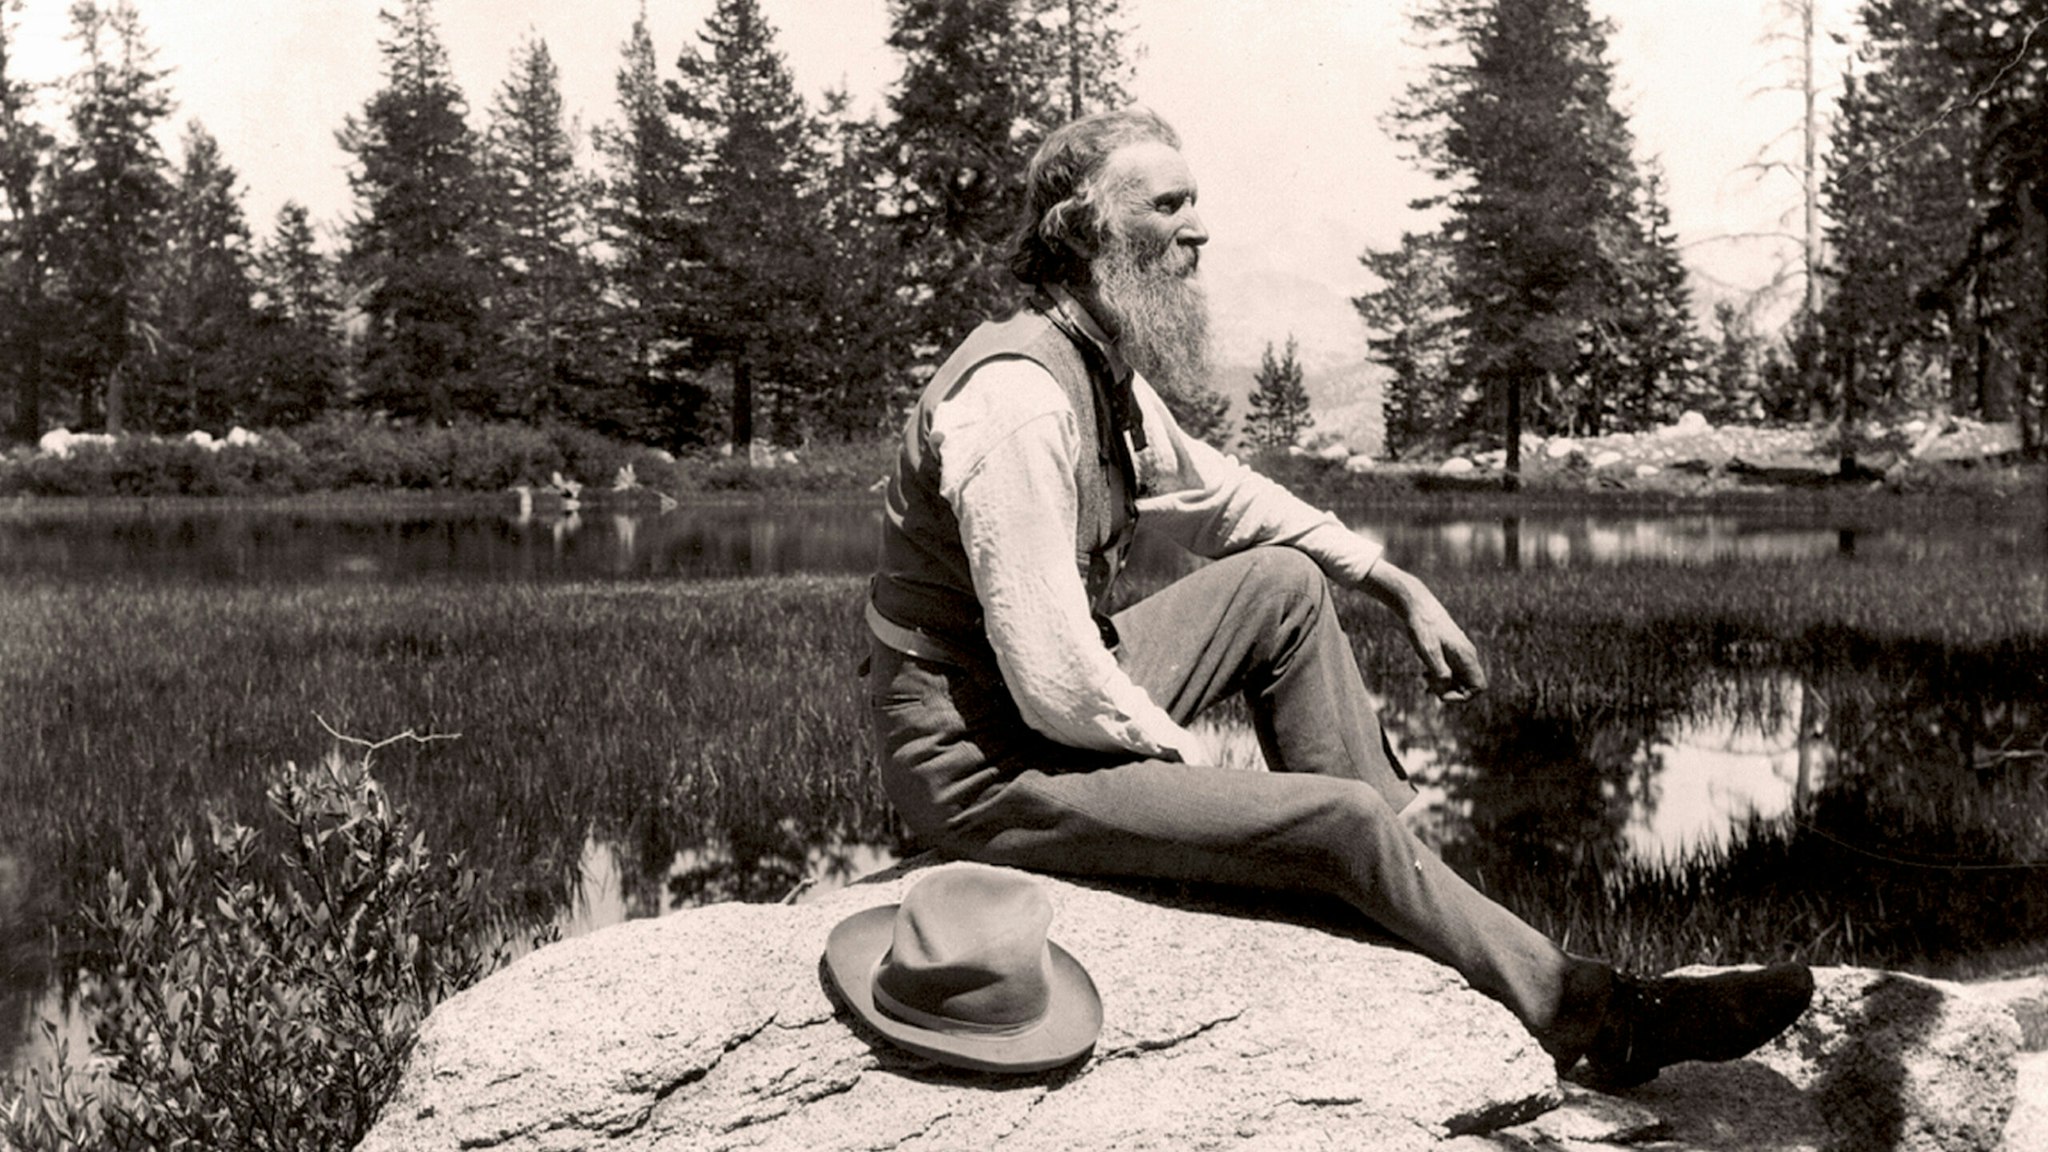 John Muir (1838-1914) Scottish-born American naturalist, engineer, writer and pioneer of conservation. Campaigned for preservation of US wilderness including Yosemite Valley and Sequoia National Park. Founder of The Sierra Club.